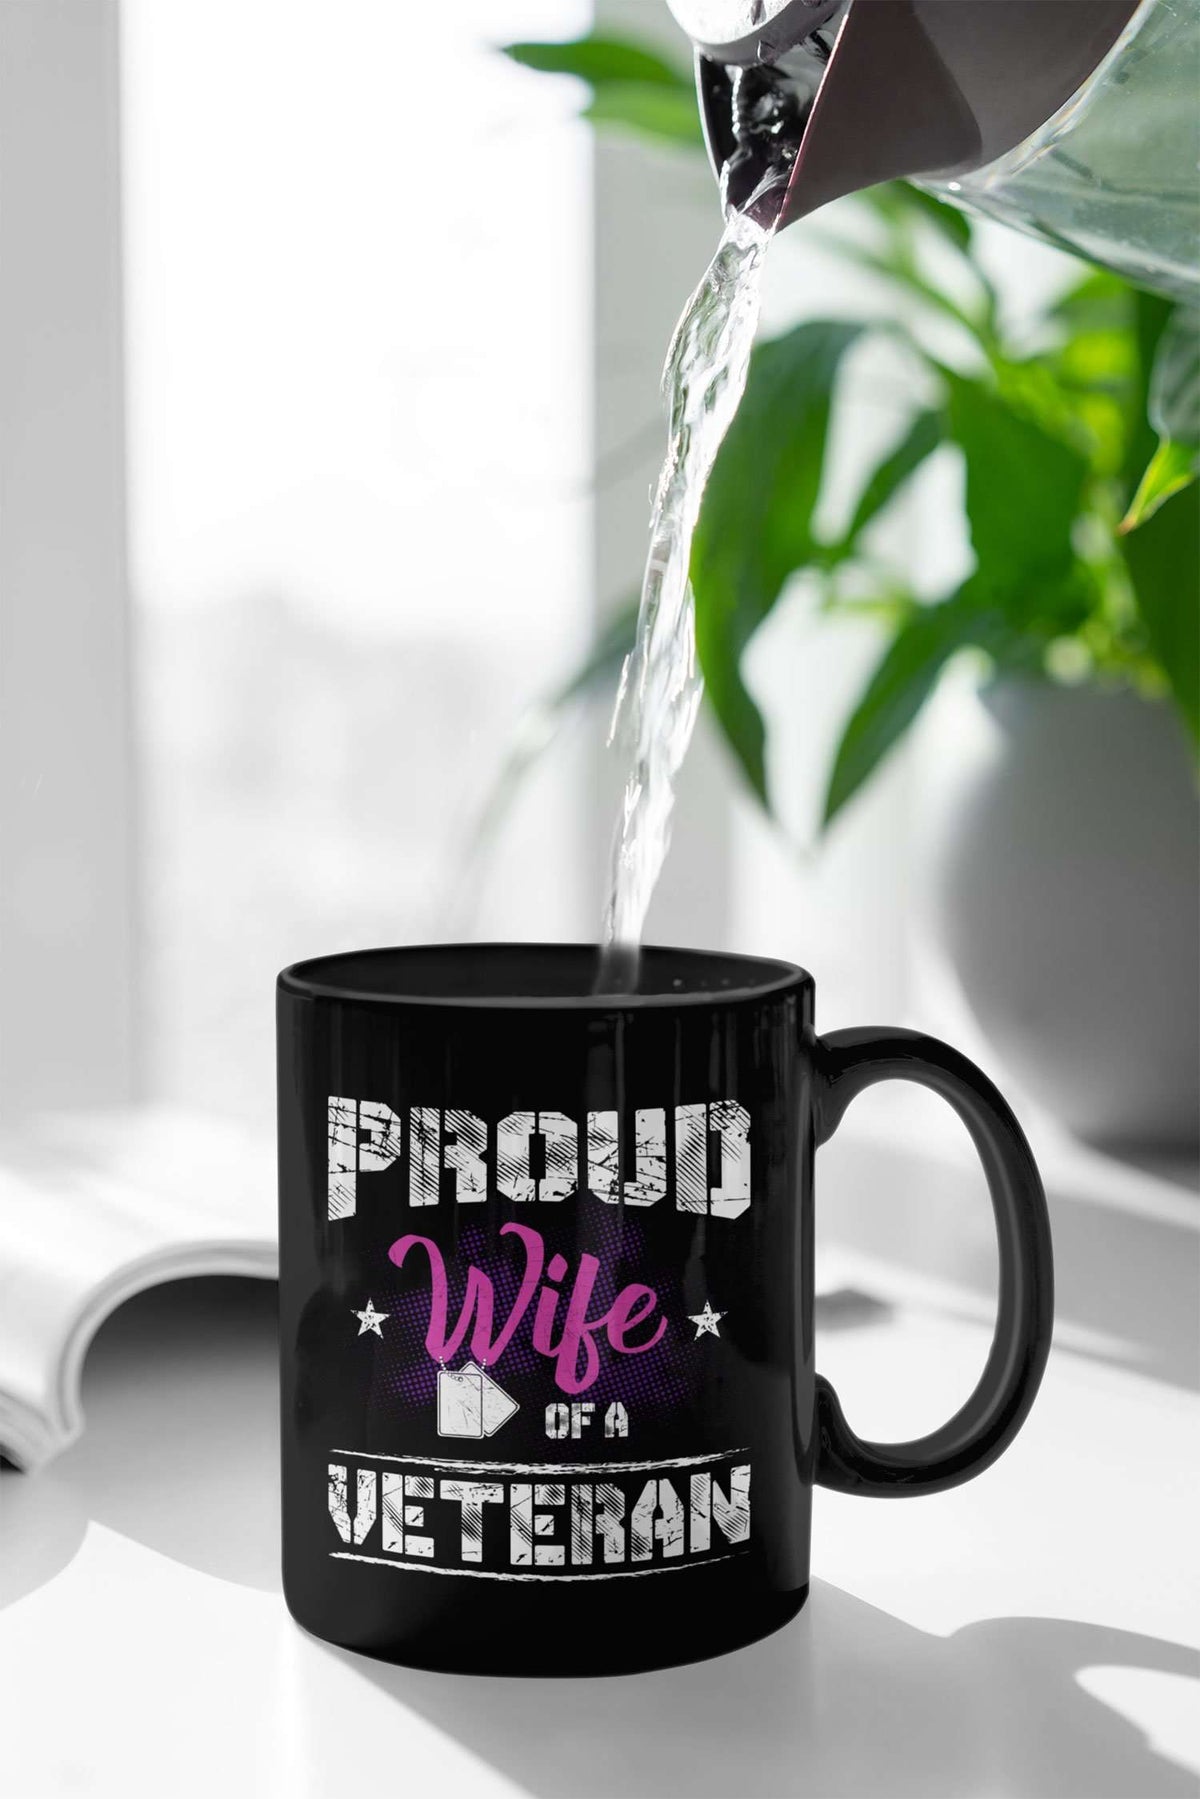 Designs by MyUtopia Shout Out:Proud Wife of a Veteran Ceramic Coffee Mug - Black